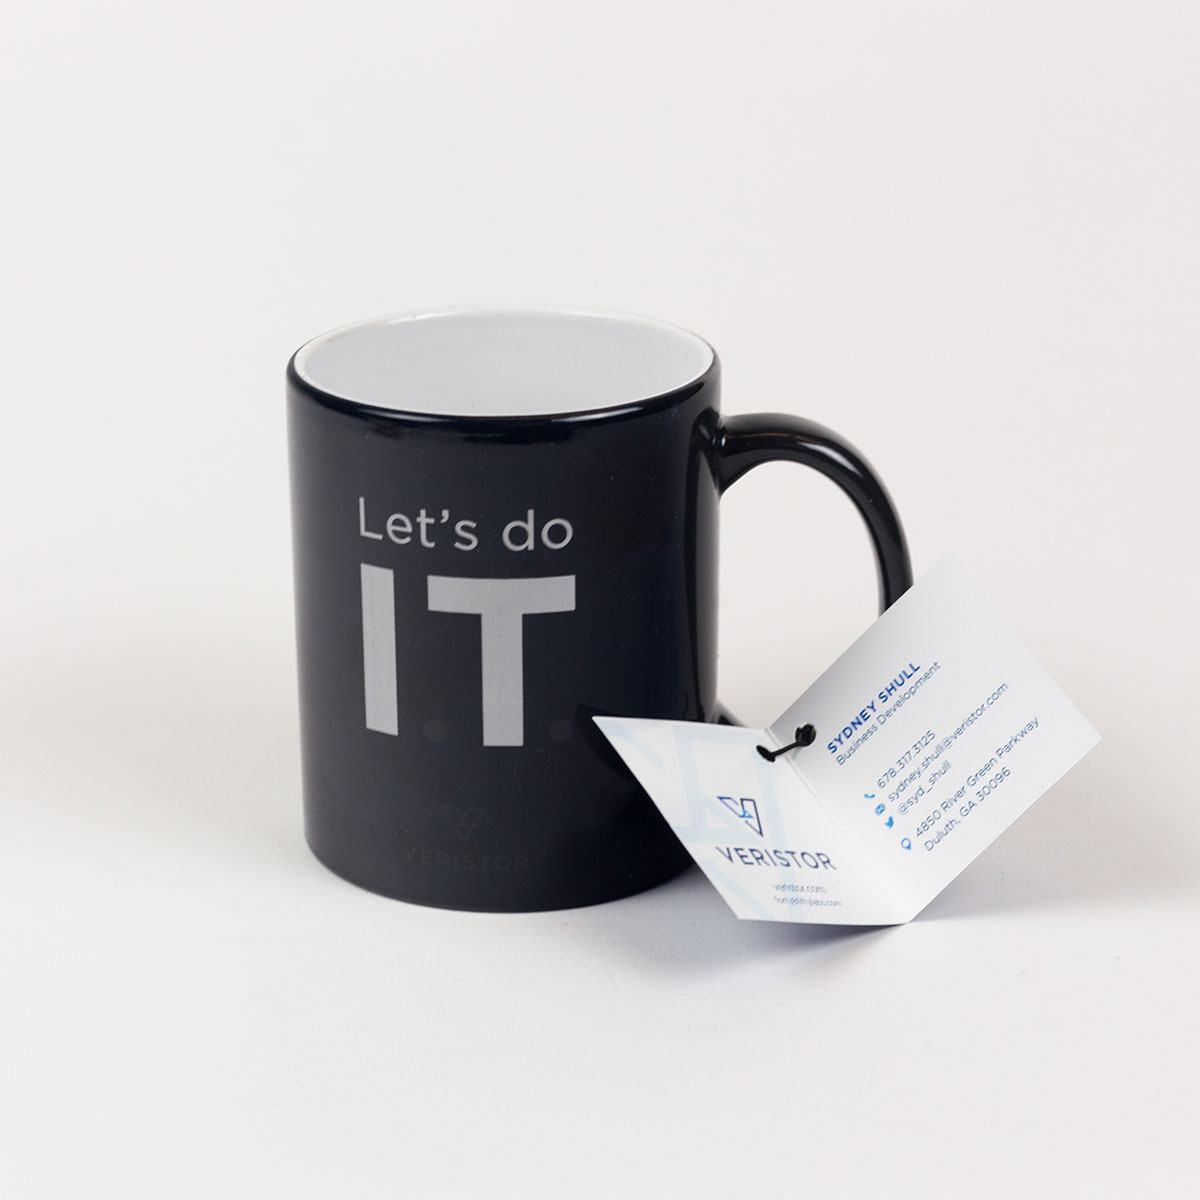 VeriStor Direct Mail Marketing Campaign – Color-Changing Mug with Printed Tag